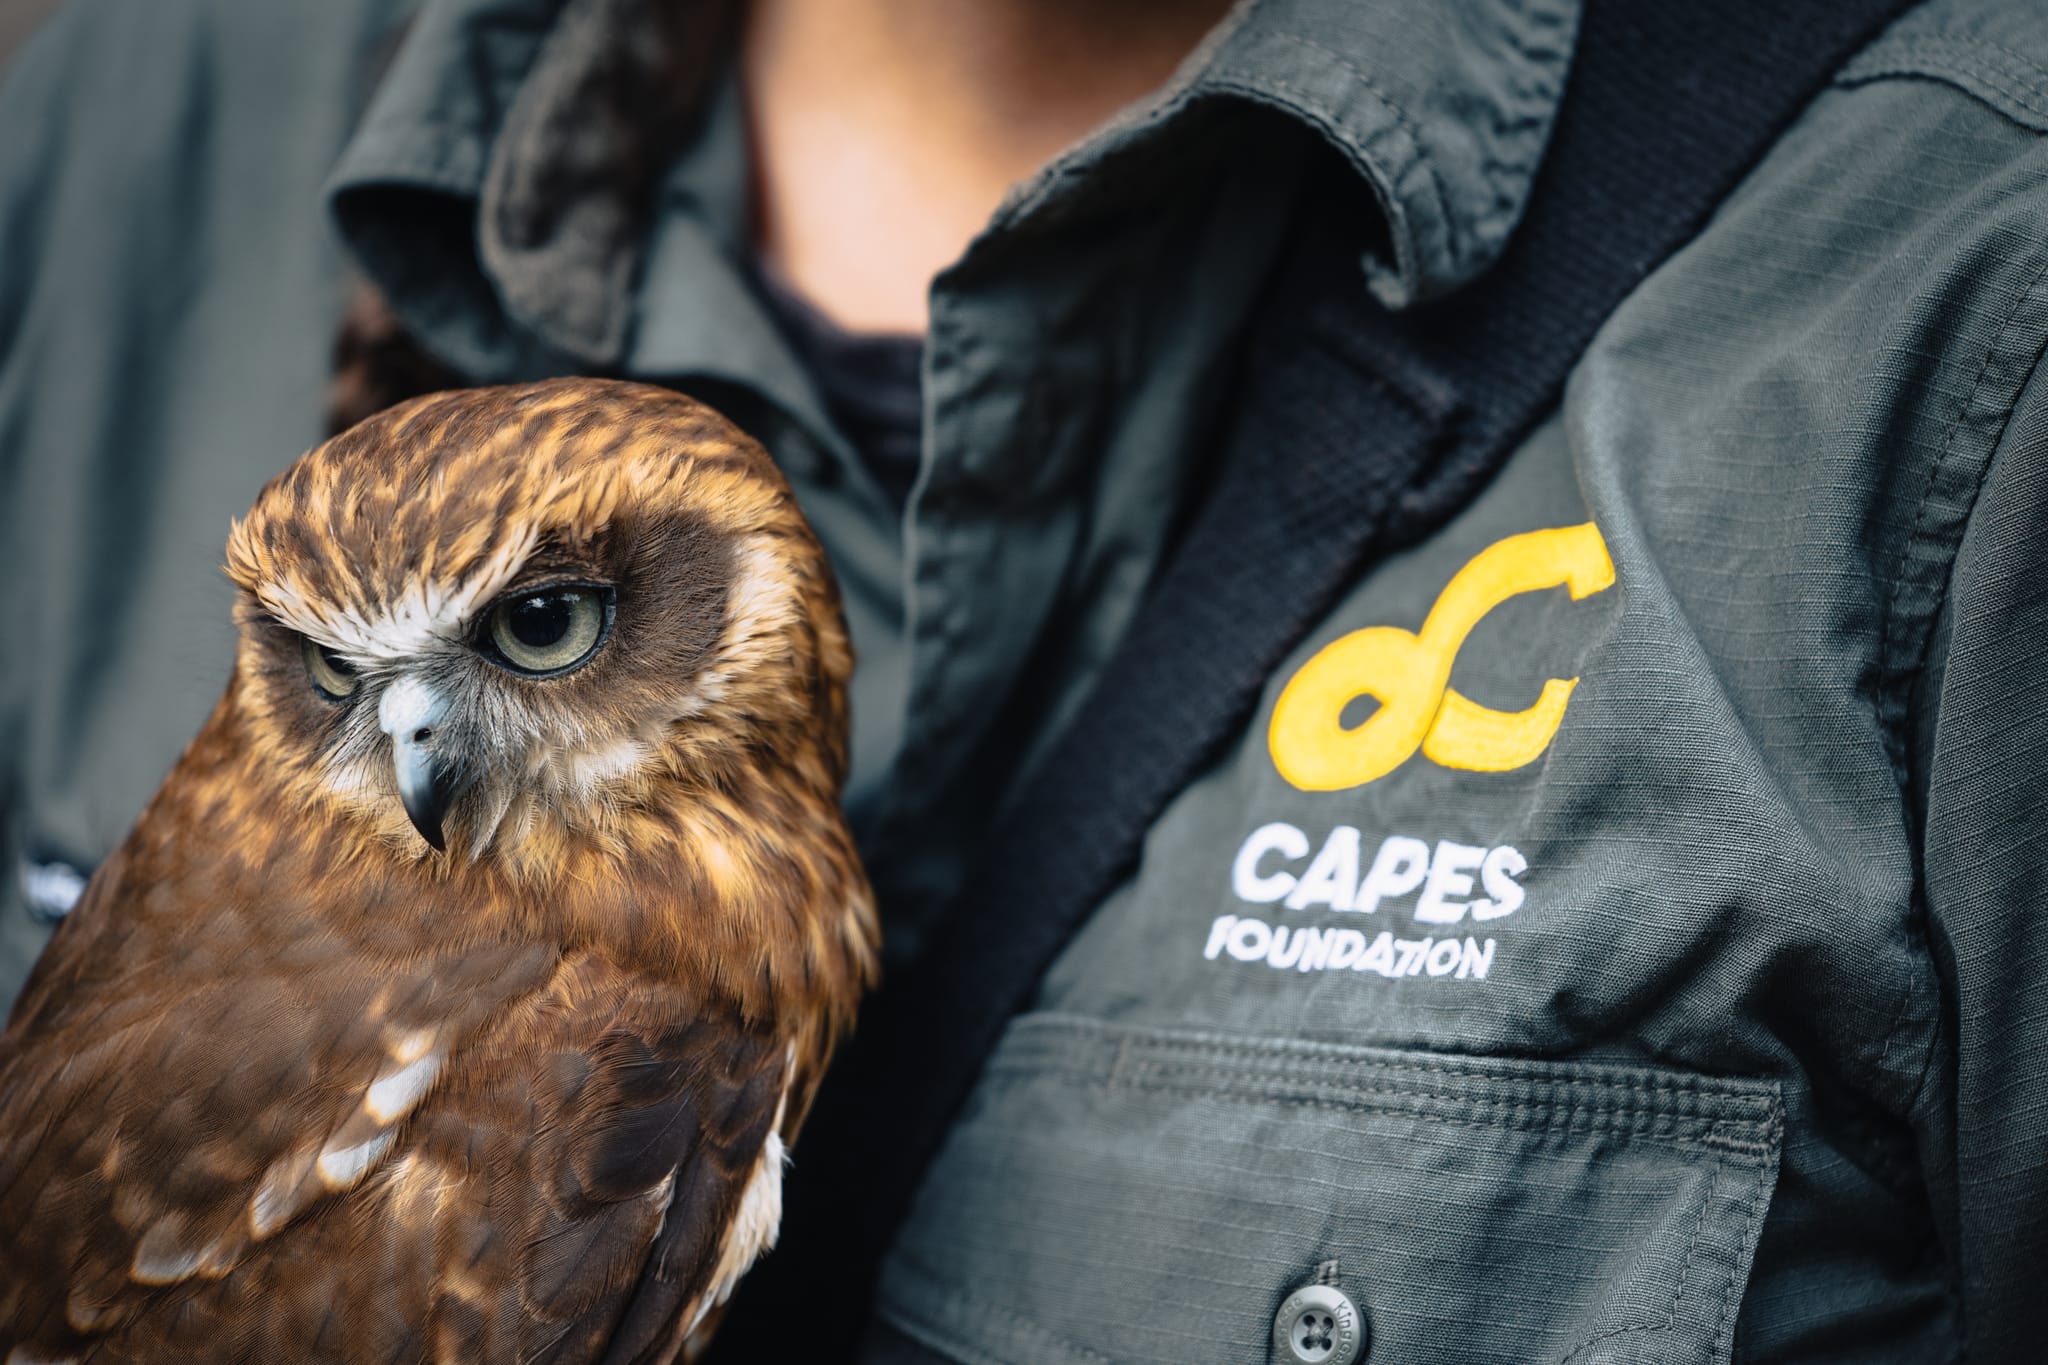 Eagles Heritage Encounters and Birds of Prey Forest Walk